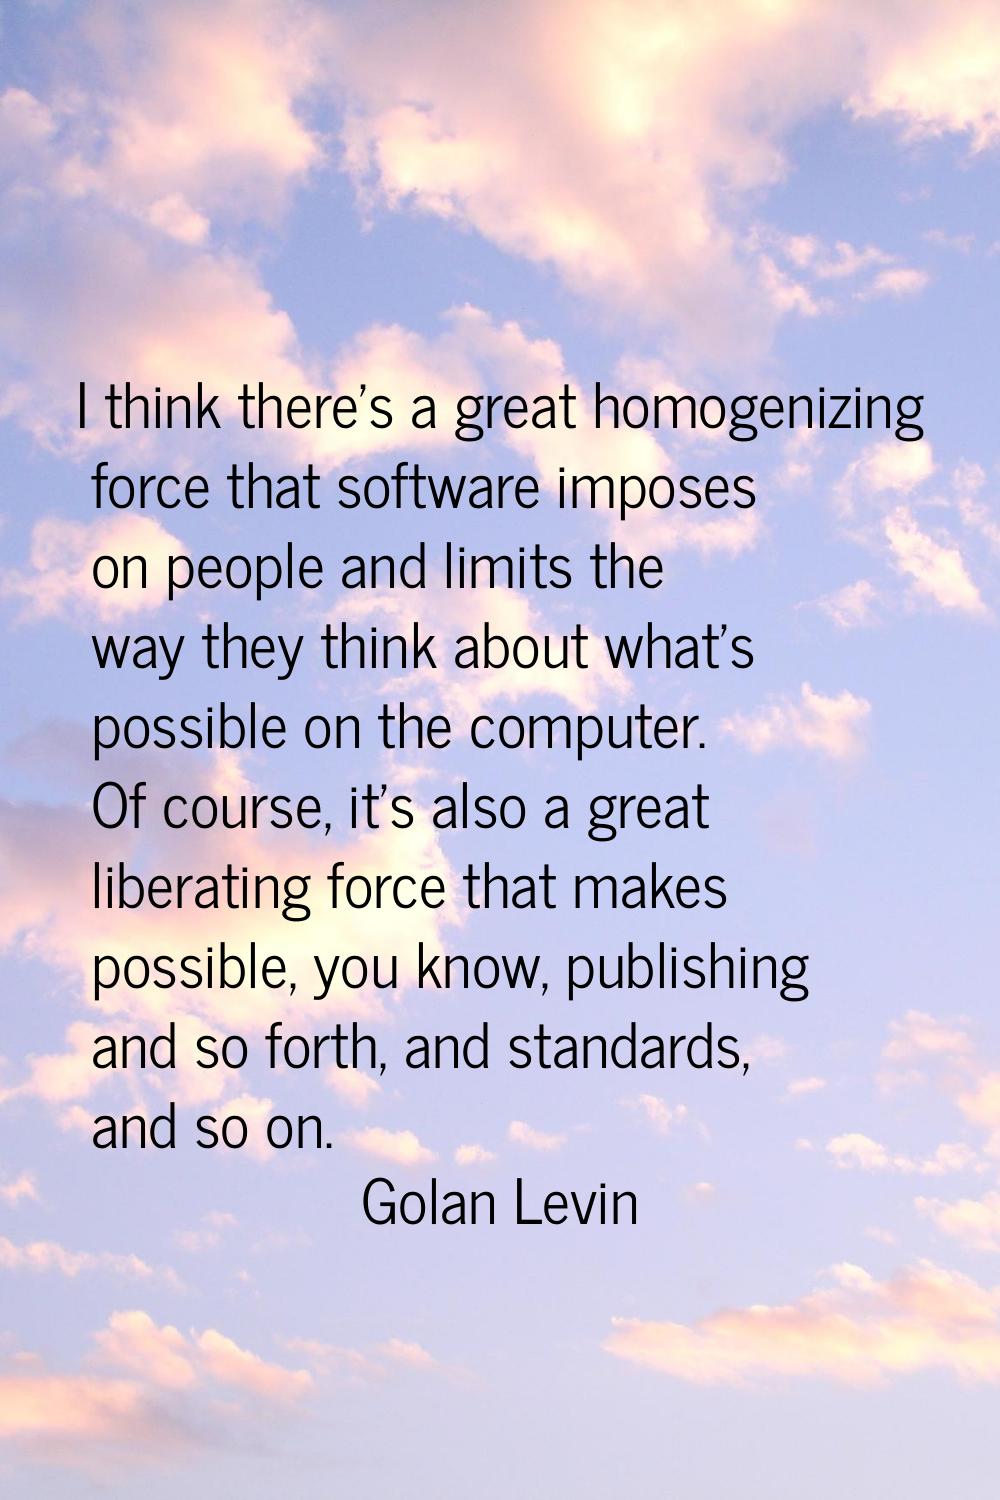 I think there's a great homogenizing force that software imposes on people and limits the way they 